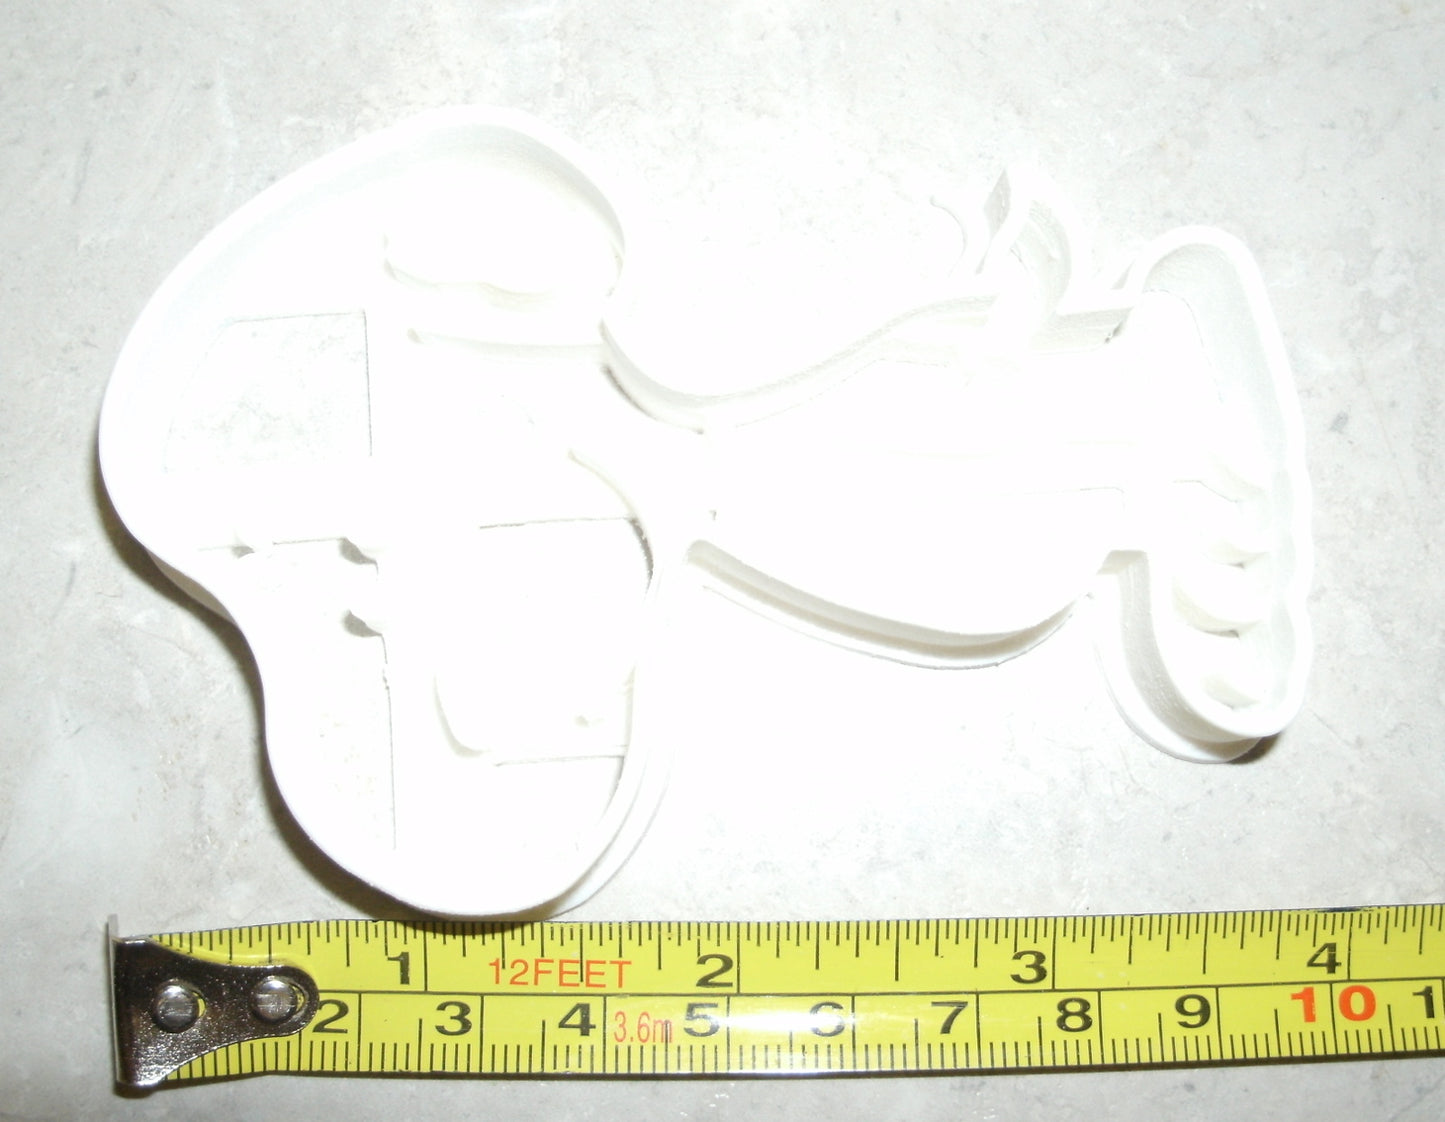 Snoopy Pet Beagle Peanuts Cartoon Character Cookie Cutter Made in USA PR615